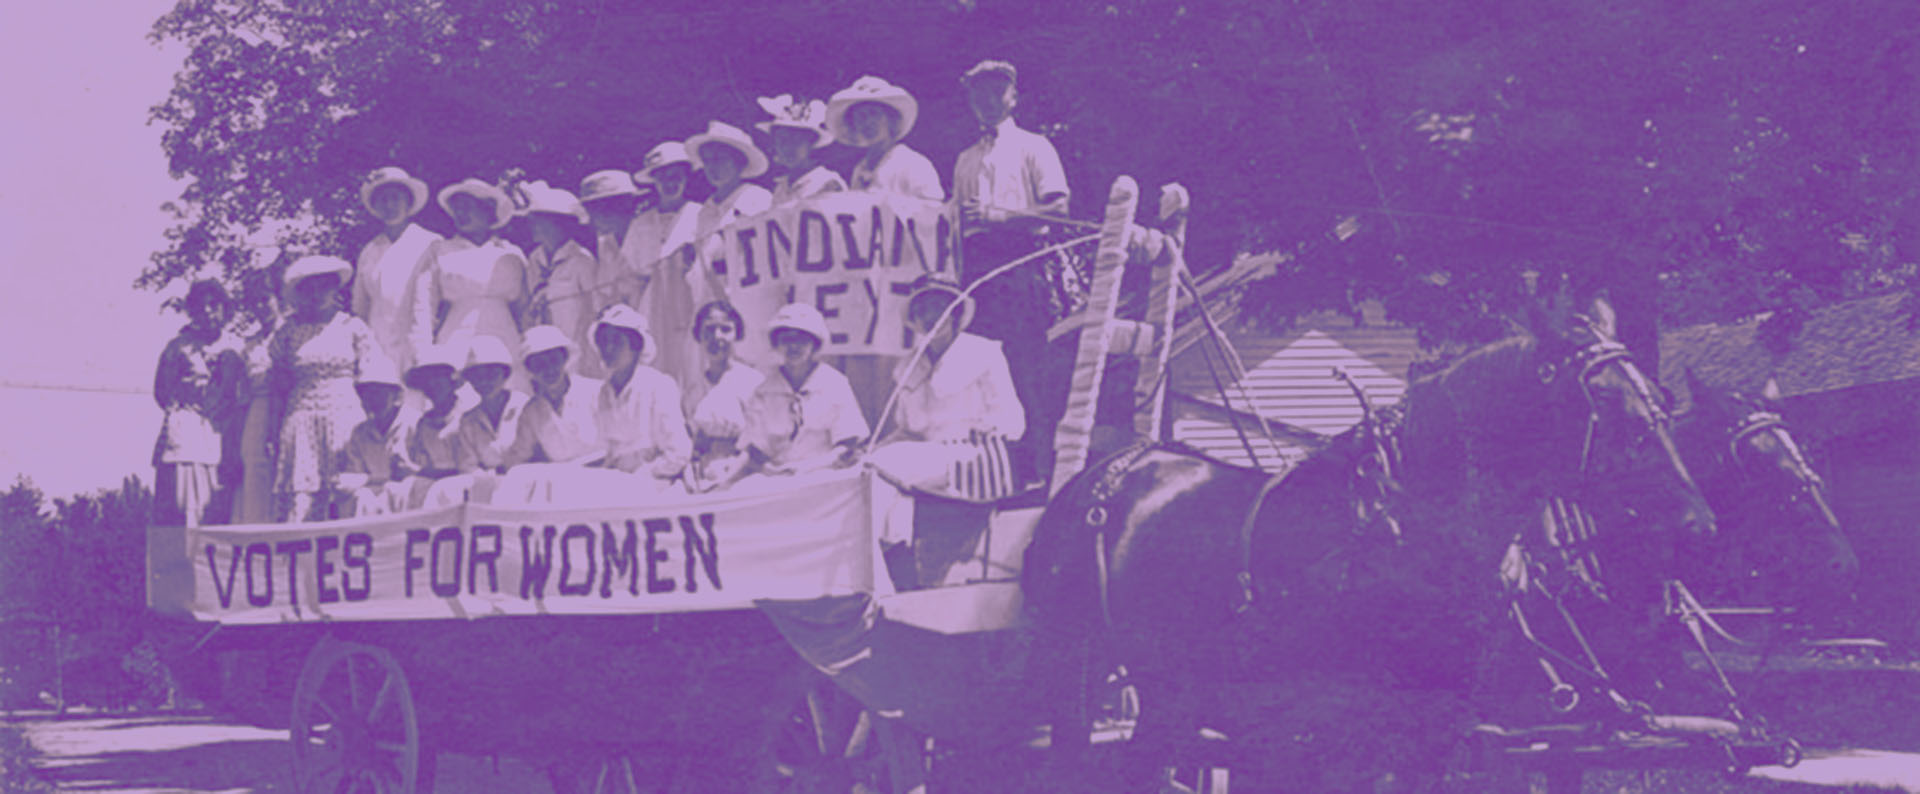 The Porter County suffragists in the horse-drawn wagon. 